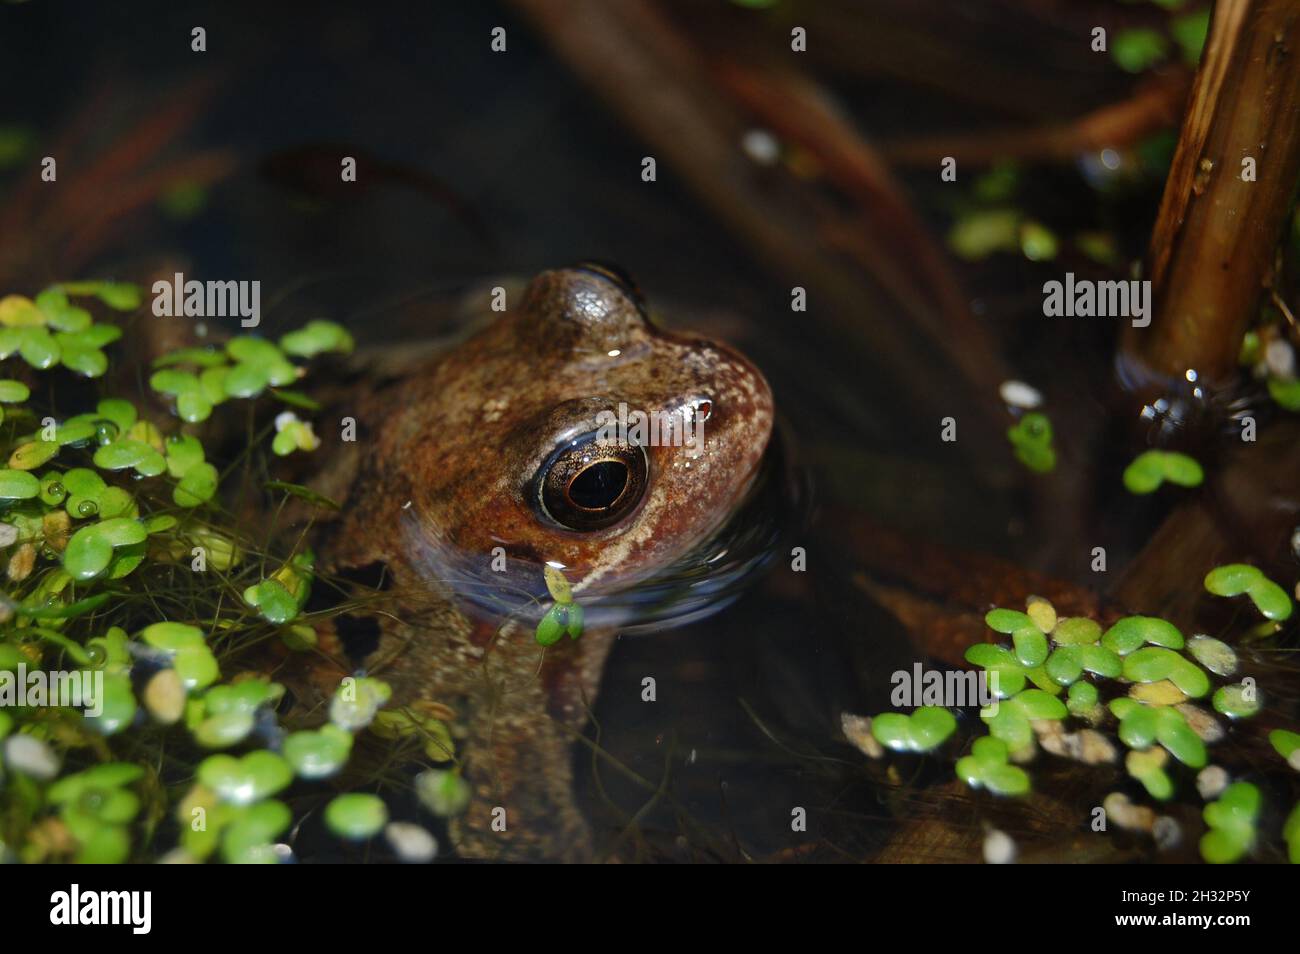 Common frog in an English garden pond Stock Photo